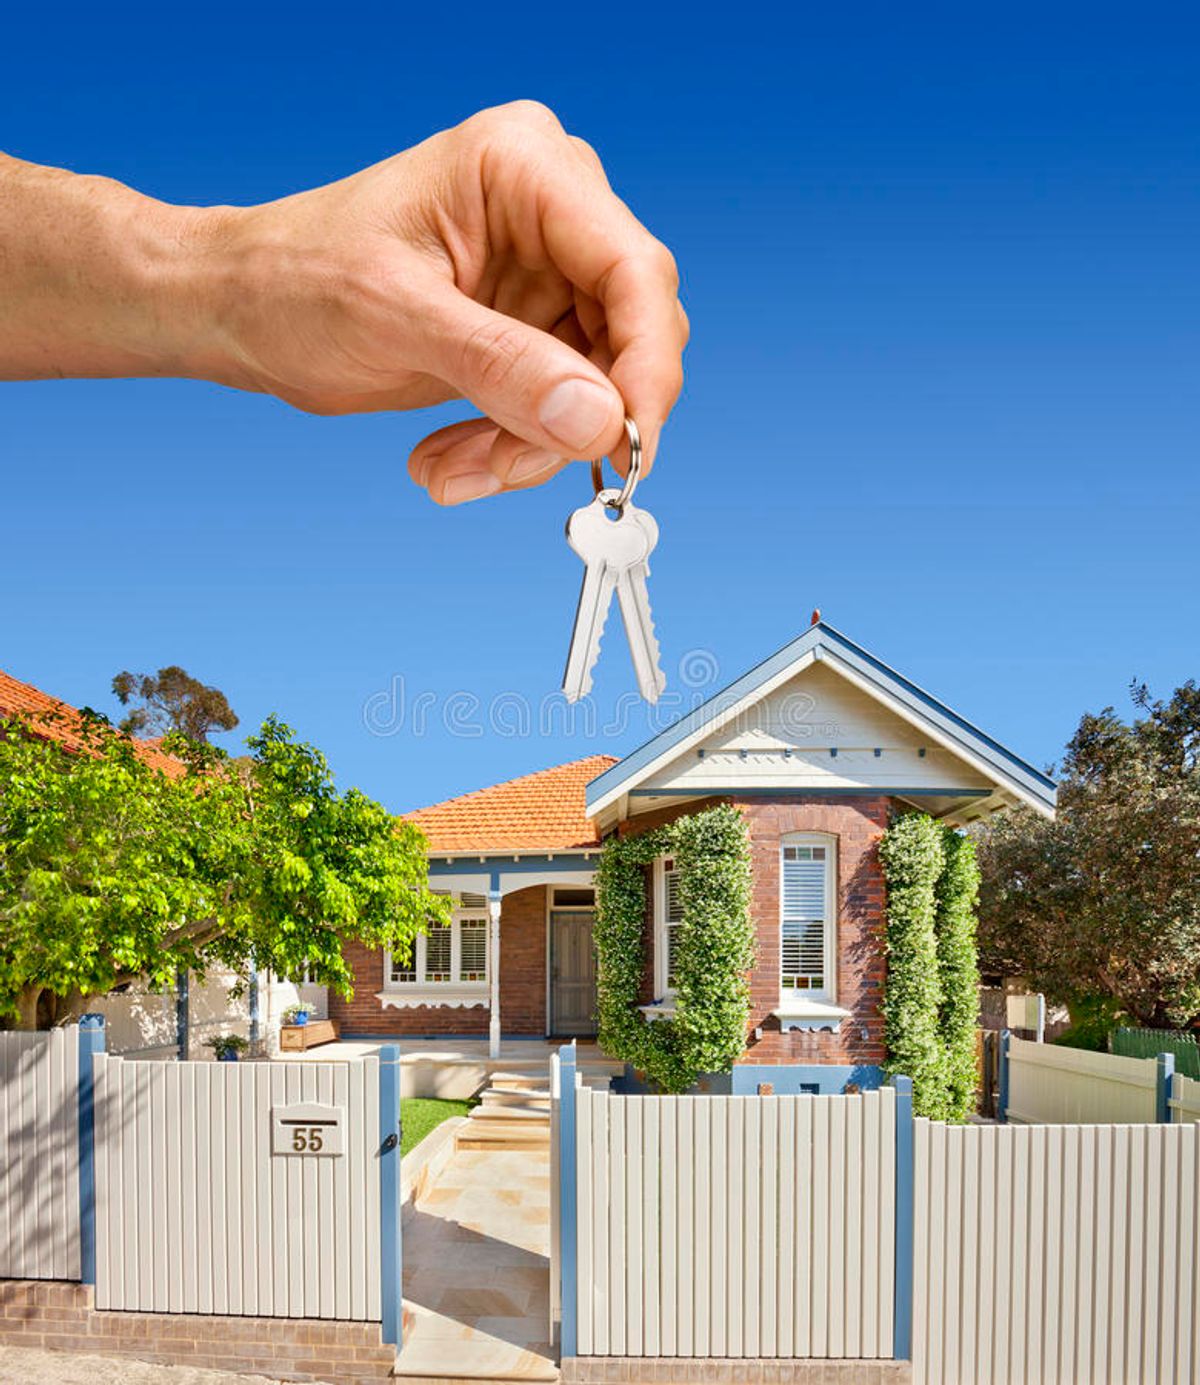 The Australian Renting Reality